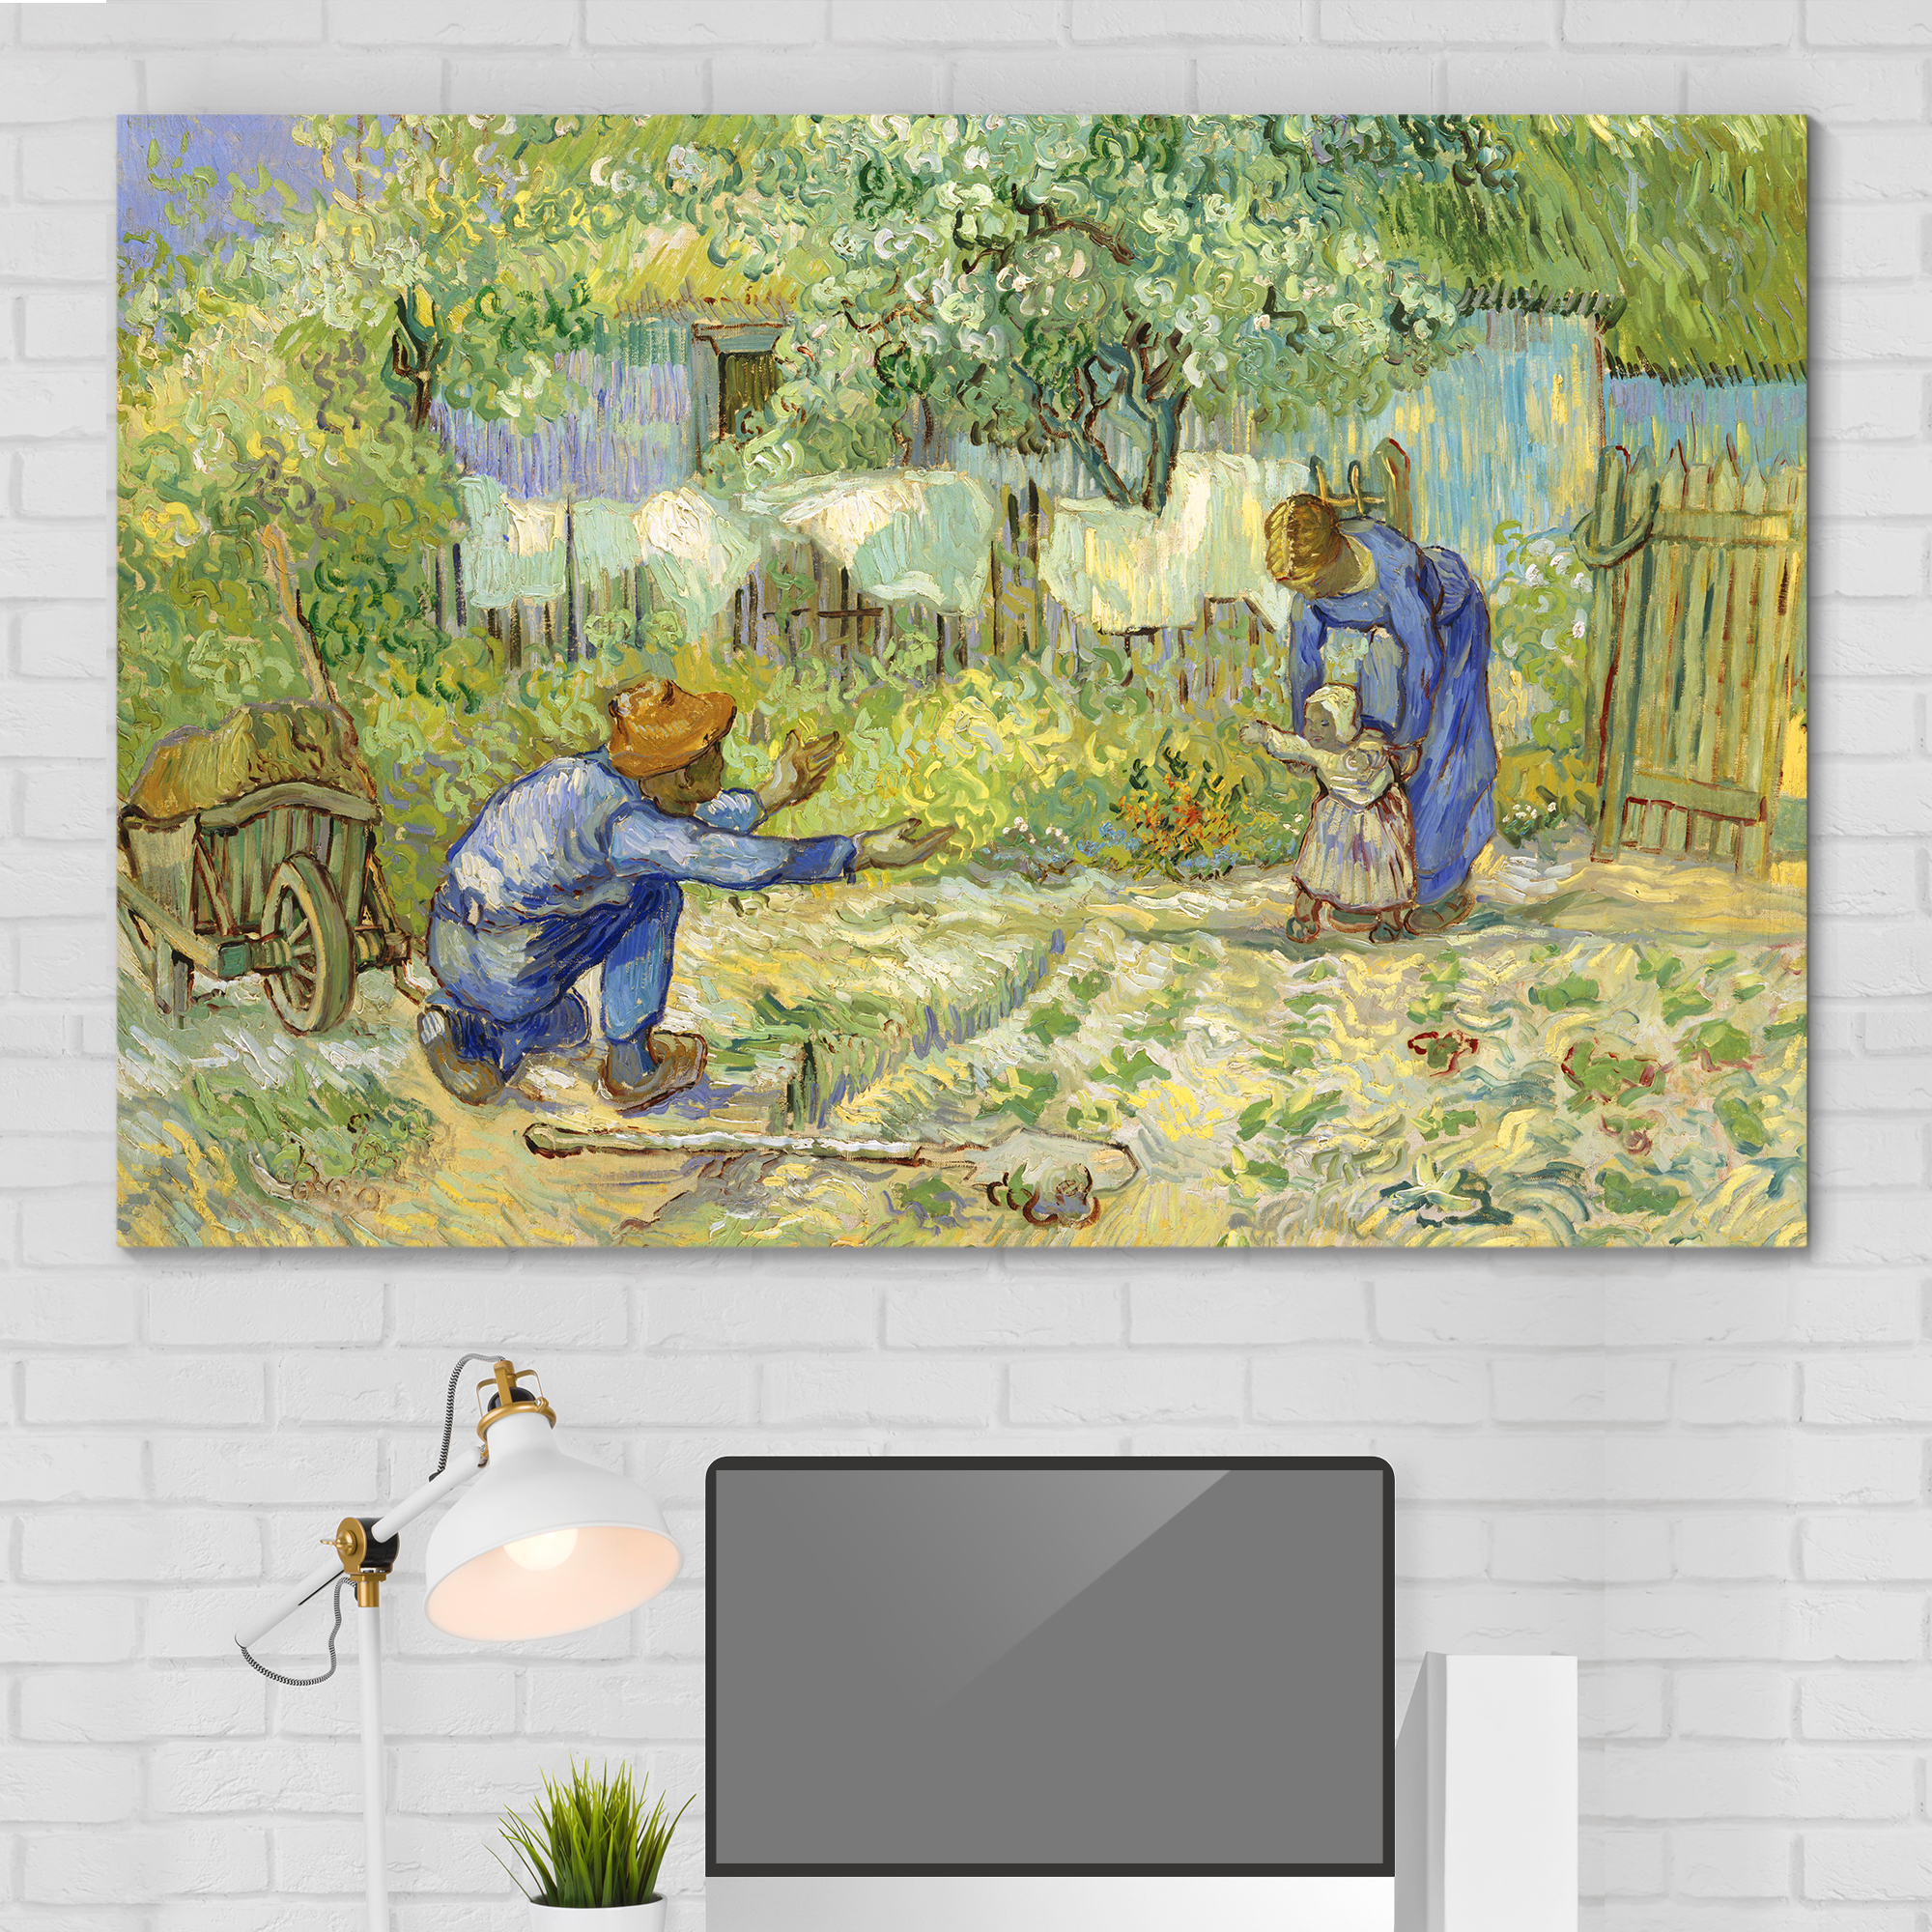 First Steps (after Millet) Vincent Van Gogh - Oil Painting Reproduction on Canvas Prints Wall Art, Ready to Hang - 12x18 inches